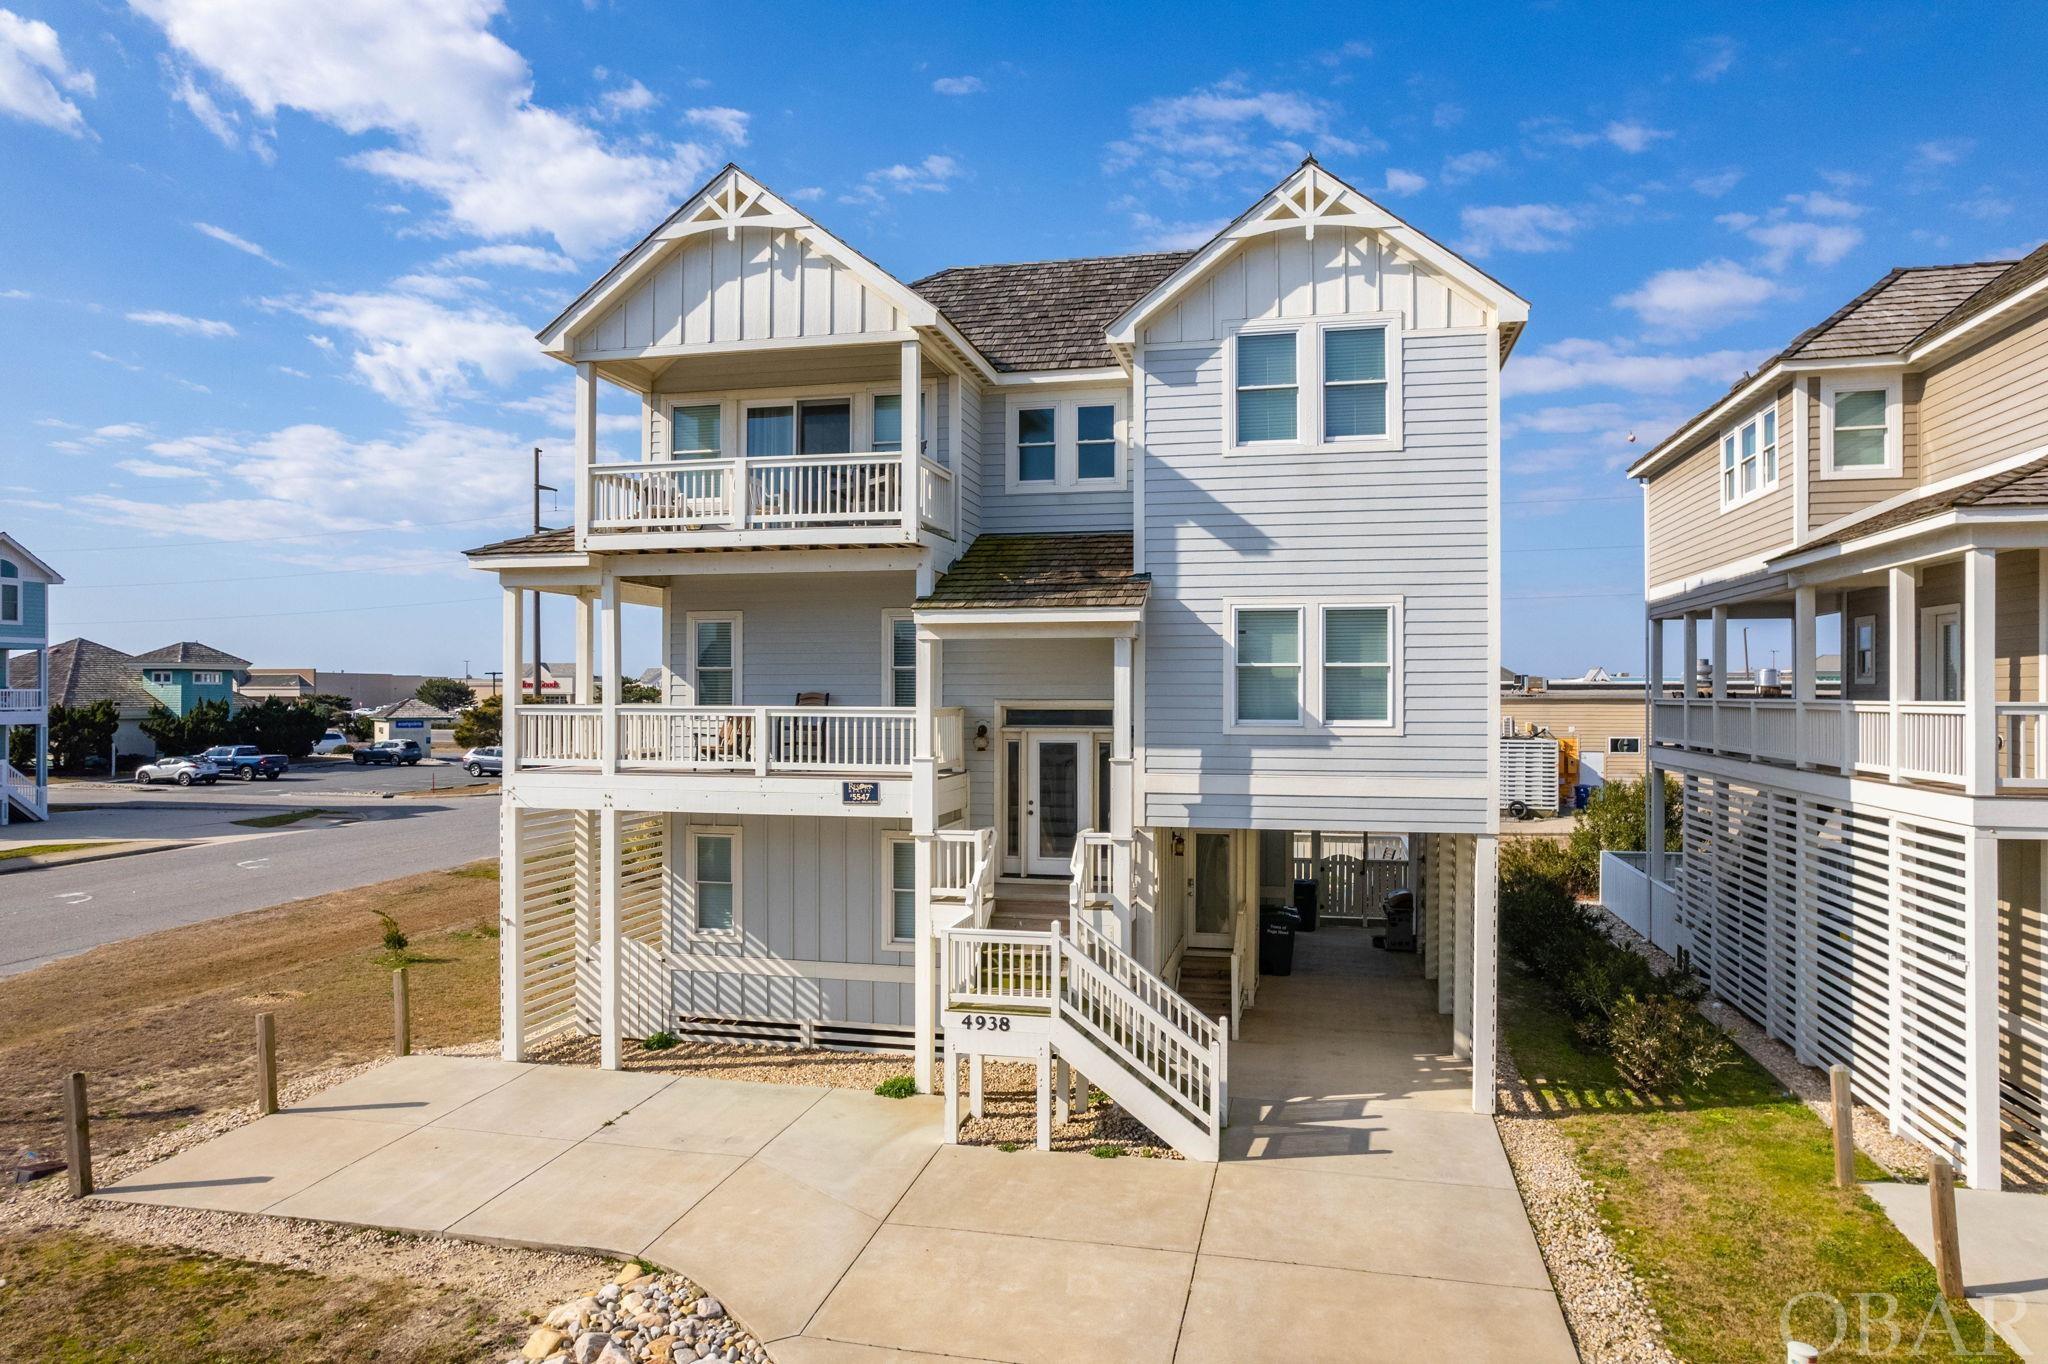 If you are looking for an upscale vacation rental investment property, “Sailfish Station” will have you hooked.  This is a 6 bedroom, 6.5 bath home located in the Moongate community of Village at Nags Head.  With over 3400 square feet, this quality built vacation property offers ocean views, a reverse floor plan, elevator, theater room, multiple en suite bedrooms, game room, private pool and more. The spacious top floor features cathedral ceilings, ocean views from the family room and its east sundeck, reclaimed pine floors, and an open floor plan.  The kitchen is stylish with white cabinetry, stainless steel appliances, a wine cooler, and granite countertops.   A large center island serves as a convenient prep area or as additional seating.  The adjacent dining space can be configured for a large or small group offering just the versatility guests need. The upper level also features a media room where the gang can gather for a movie before heading off to the first of the 6 comfortable bedrooms.  On this level is a spacious primary bedroom with a private deck and a luxurious en suite bathroom. Plank flooring, a double vanity and a separate custom tiled shower and bath create a true spa-like experience.  This suite even boasts its own washer and dryer.    The elevator will take you down to the mid-level where 4 more generous en suite bedrooms await, each with a well appointed private bath, and 3 with covered deck access.  For convenience, another washer and dryer are here.  And don’t worry about closet space- this property has closets galore! The final bedroom is found on the ground level along with a full bathroom.  The adjoining game room is spacious and features durable tile plank flooring.  A handy granite-topped wet bar and a refrigerator make enjoying a game of pool or a turn at the arcade game all the better without having to run to the kitchen for refreshments.  Outside, a 24x10 private pool and hot tub will do the trick for those who take a break from a day at the beach.  But it’s only a short 160 yards to the crosswalk for a morning beach stroll to watch the sun rise over the ocean or catch the dolphin playing in the surf. “Sailfish Station” is an upscale, quality-built vacation home with comfort and convenience in mind.  The ocean views, thoughtful layout, custom touches and proximity to local restaurants and shopping make this property special.  Located in the heart of Nags Head, owners and guests of this vacation property may enjoy the amenities of Village at Nags Head which include a community shuttle, ocean and sound accesses, Village Beach and Tennis Club, and more.  Reel this one in now!